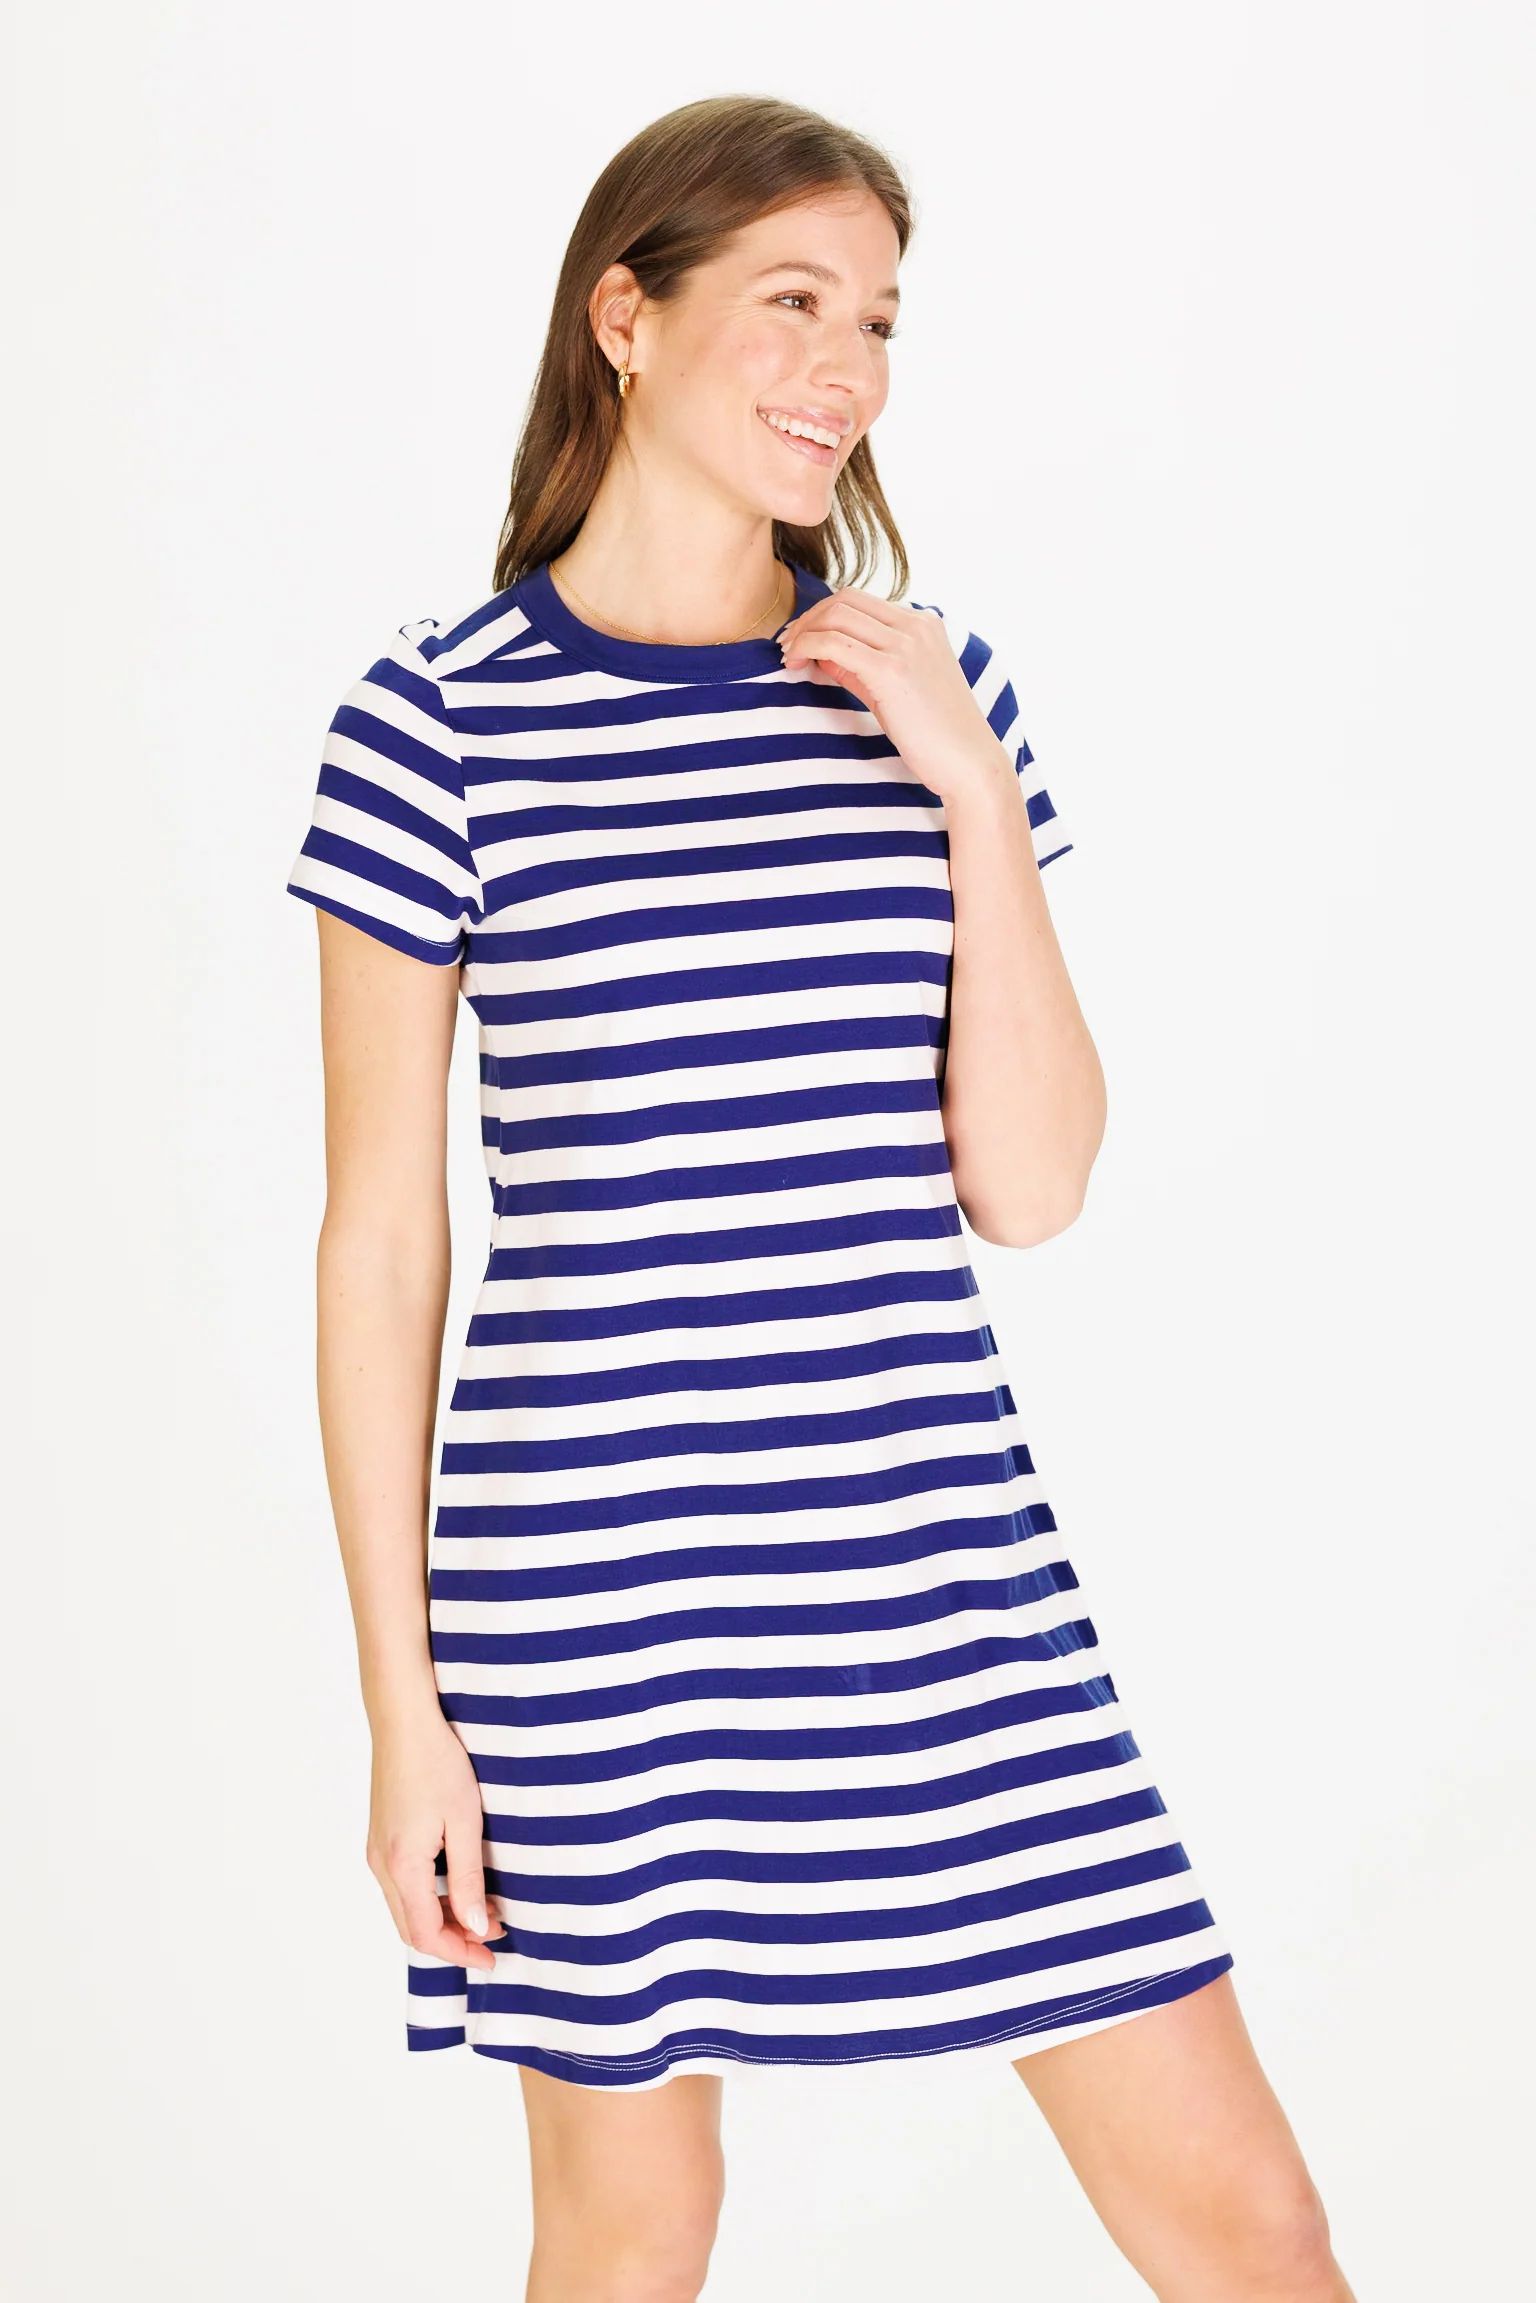 Tallie T-Shirt Dress in Navy and White Stripe | Duffield Lane